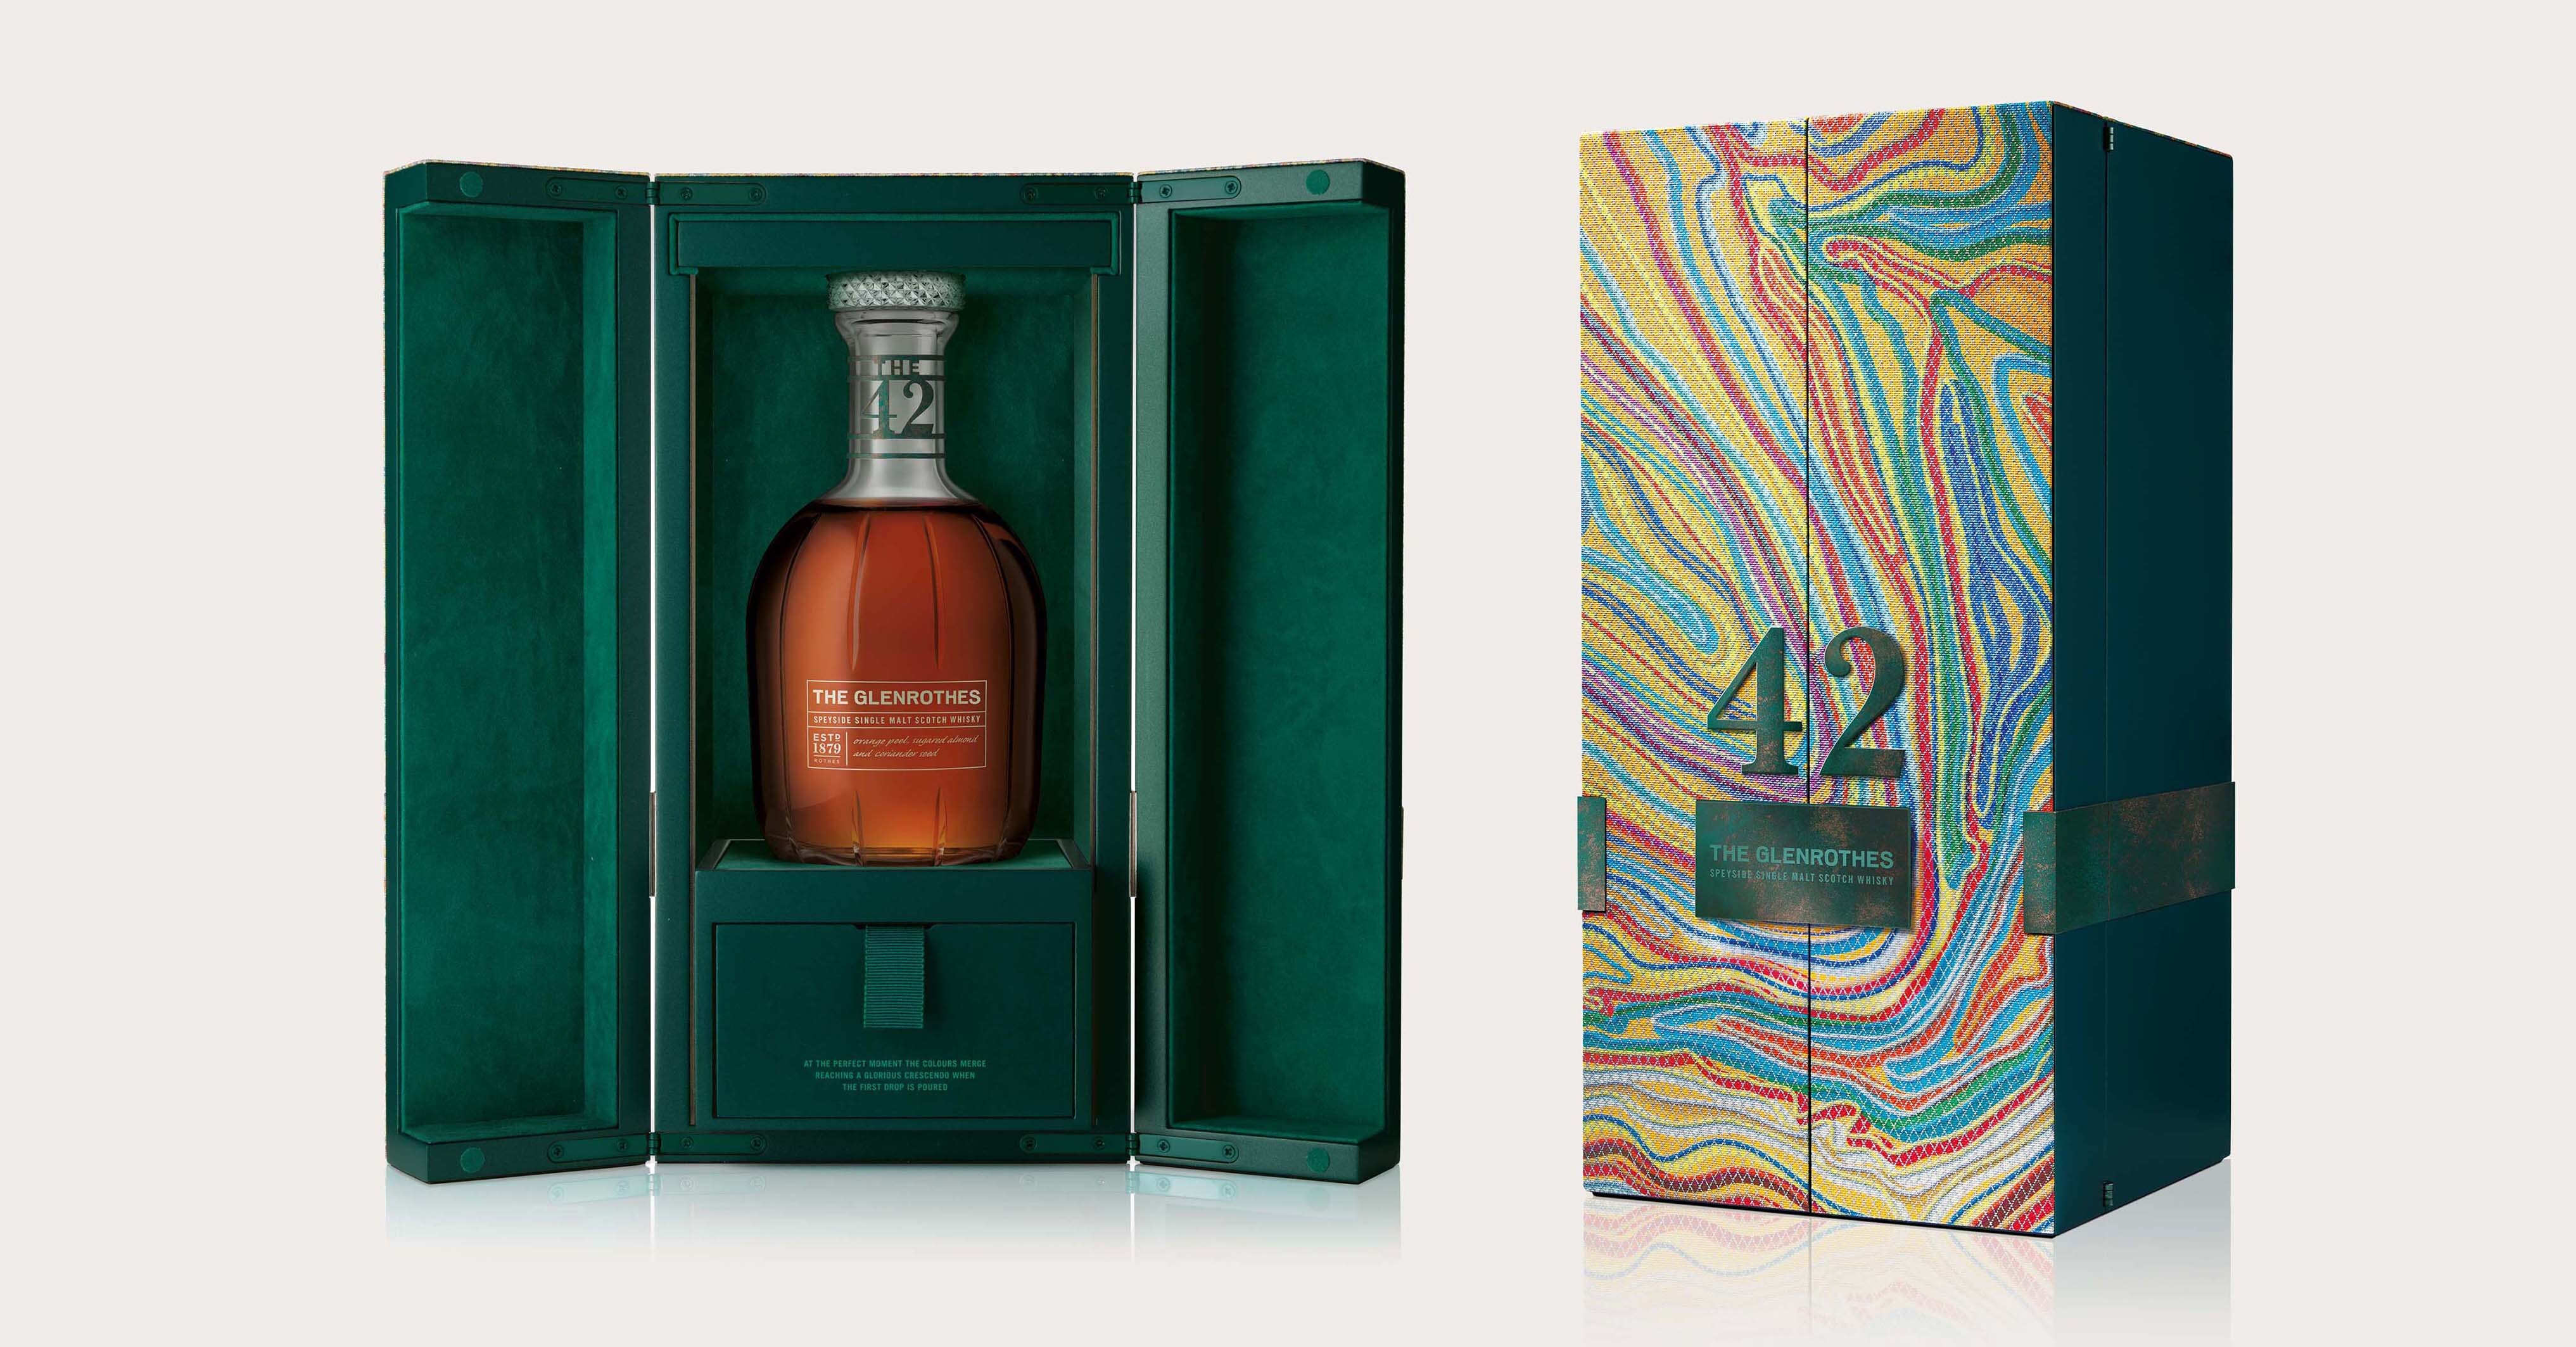 Lewis Moberly Takes Bold Design Approach for New Prestige Whisky